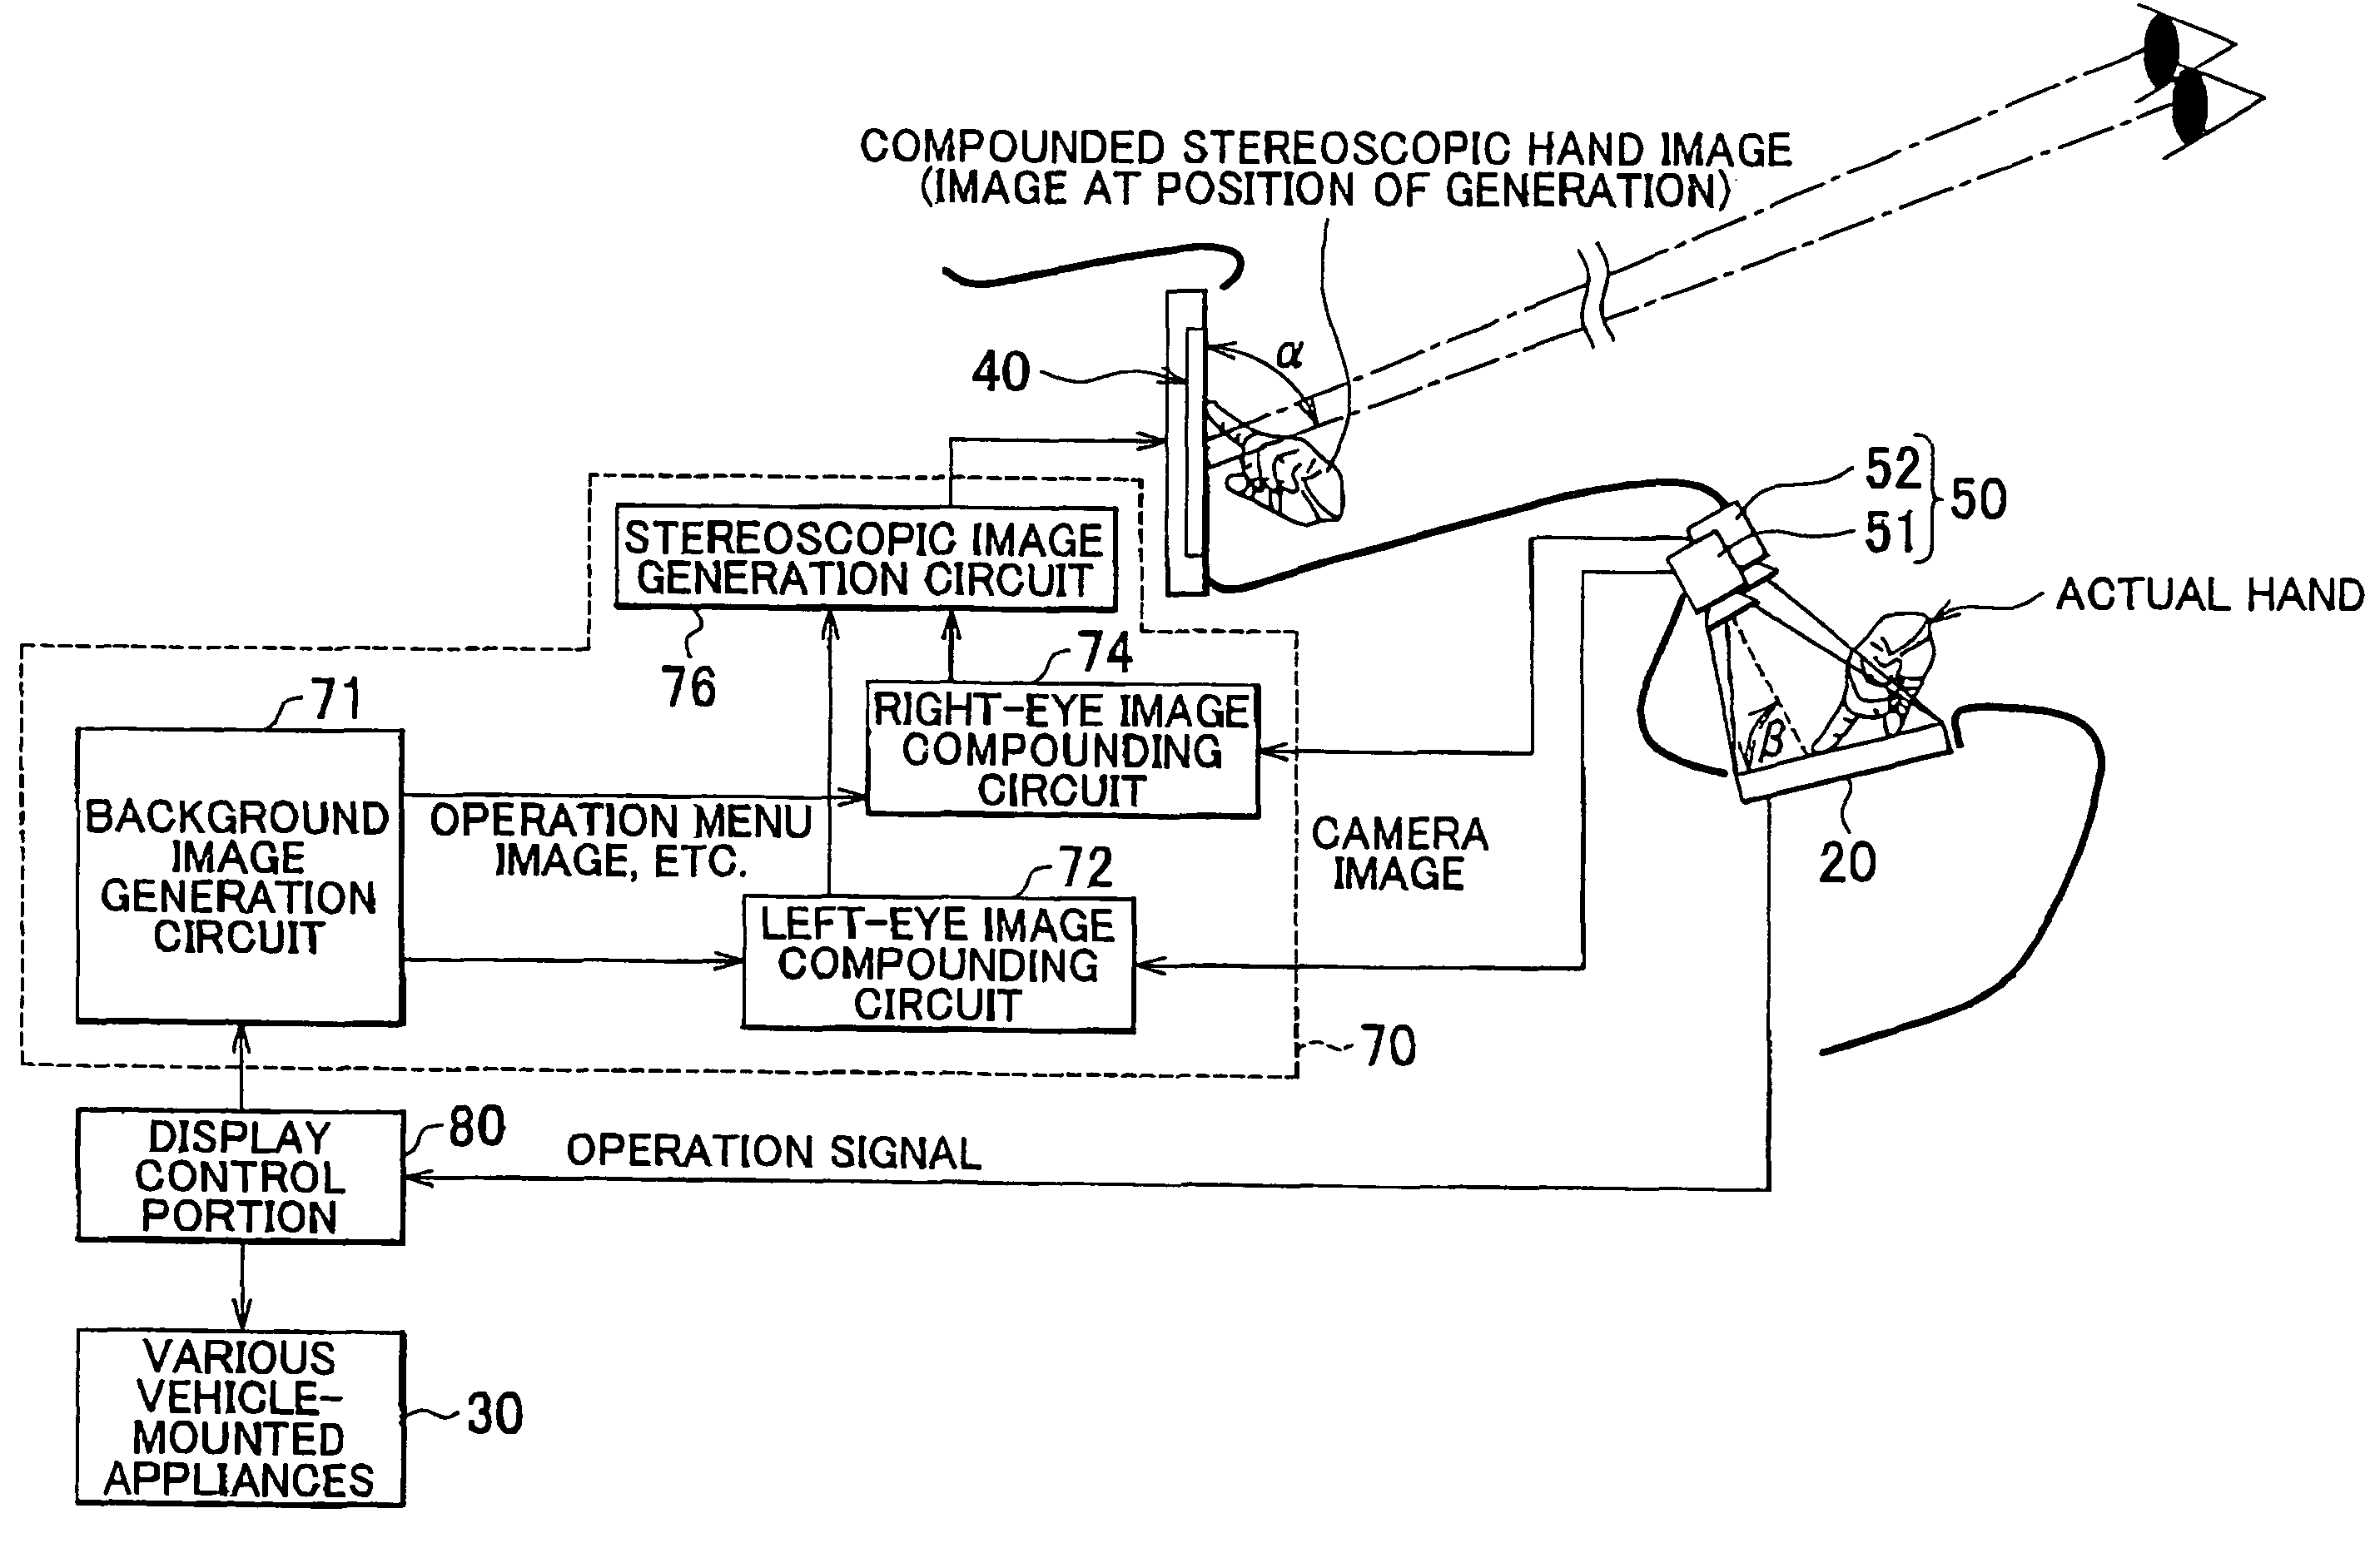 Operating device